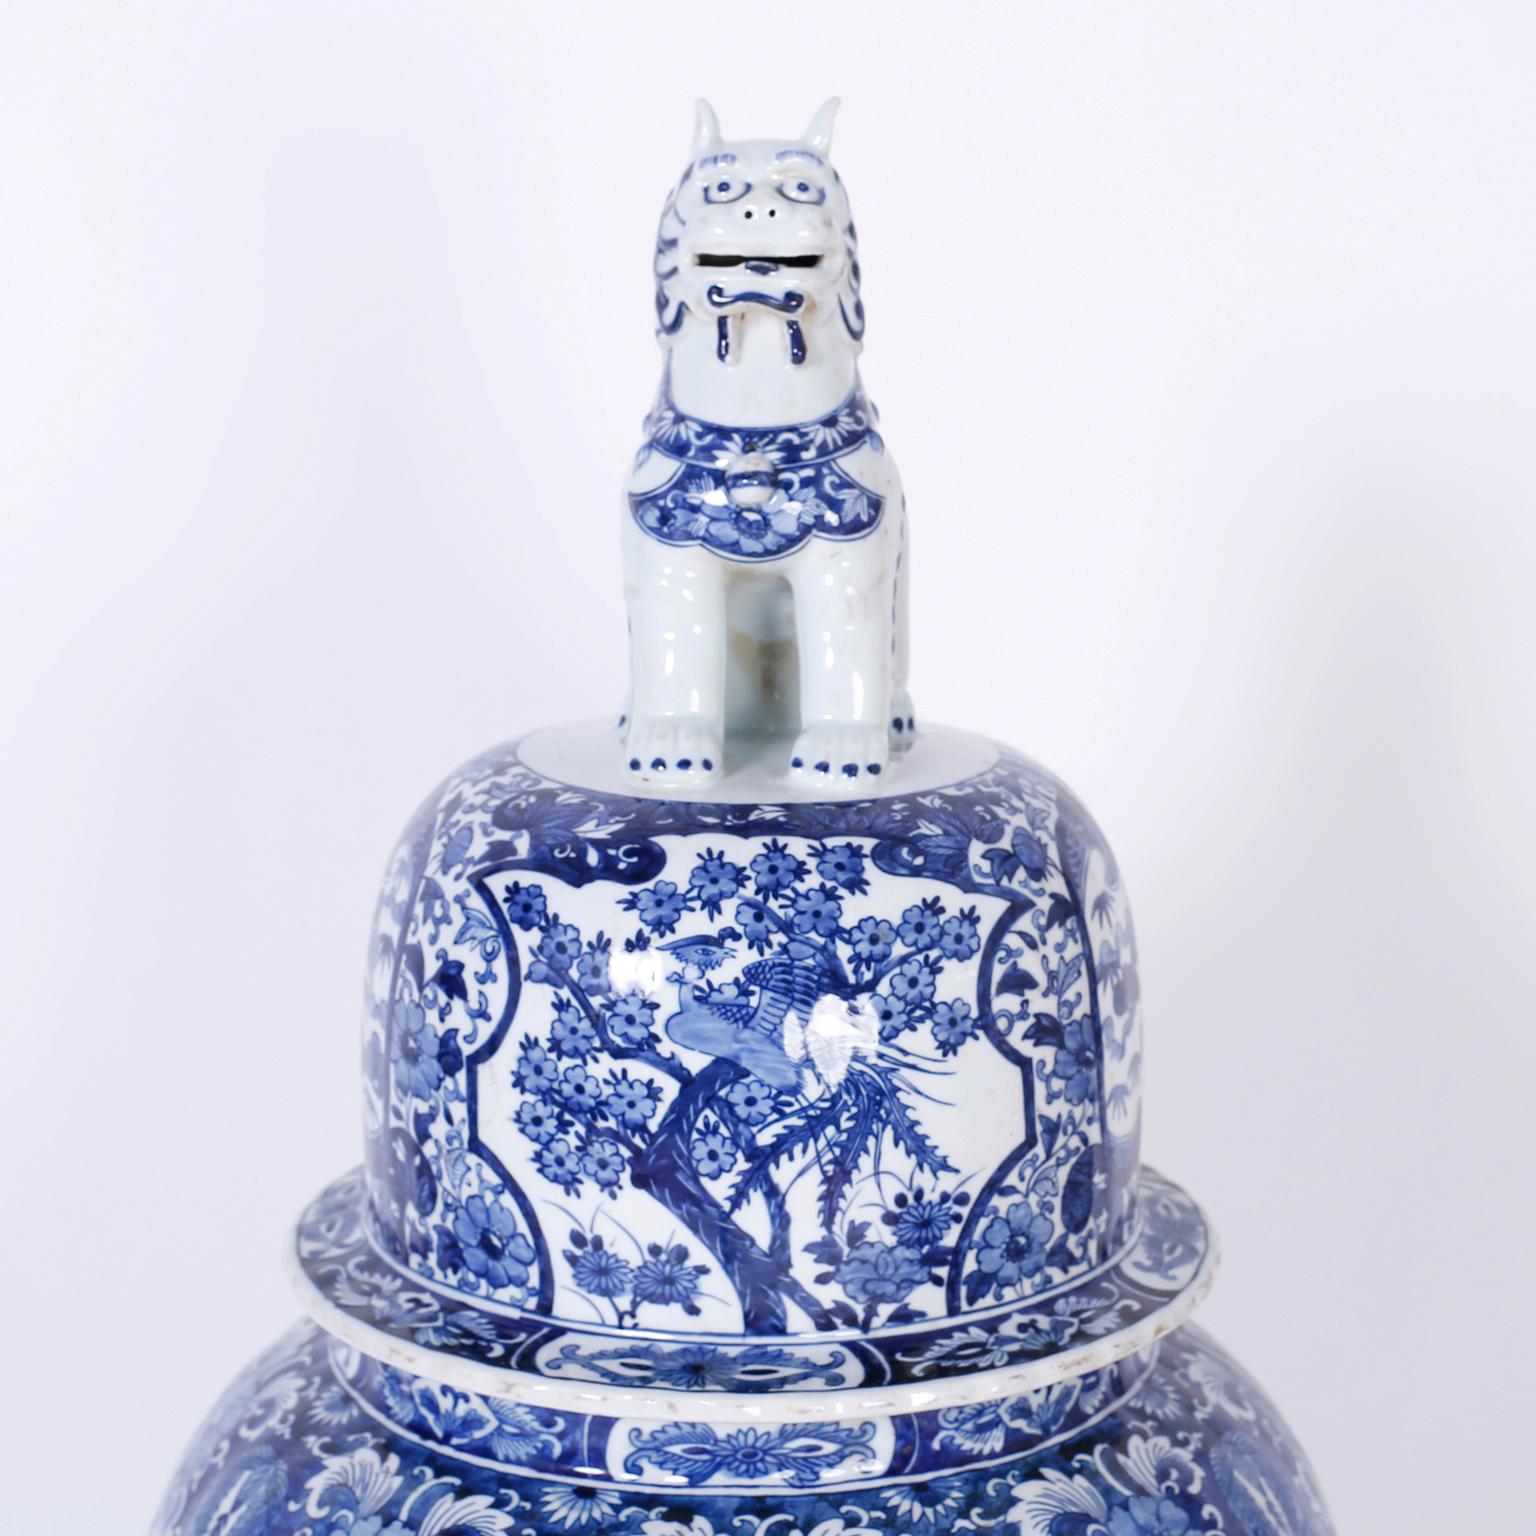 Chinese Export Large Pair of Chinese Blue and White Porcelain Jars or Palace Urns